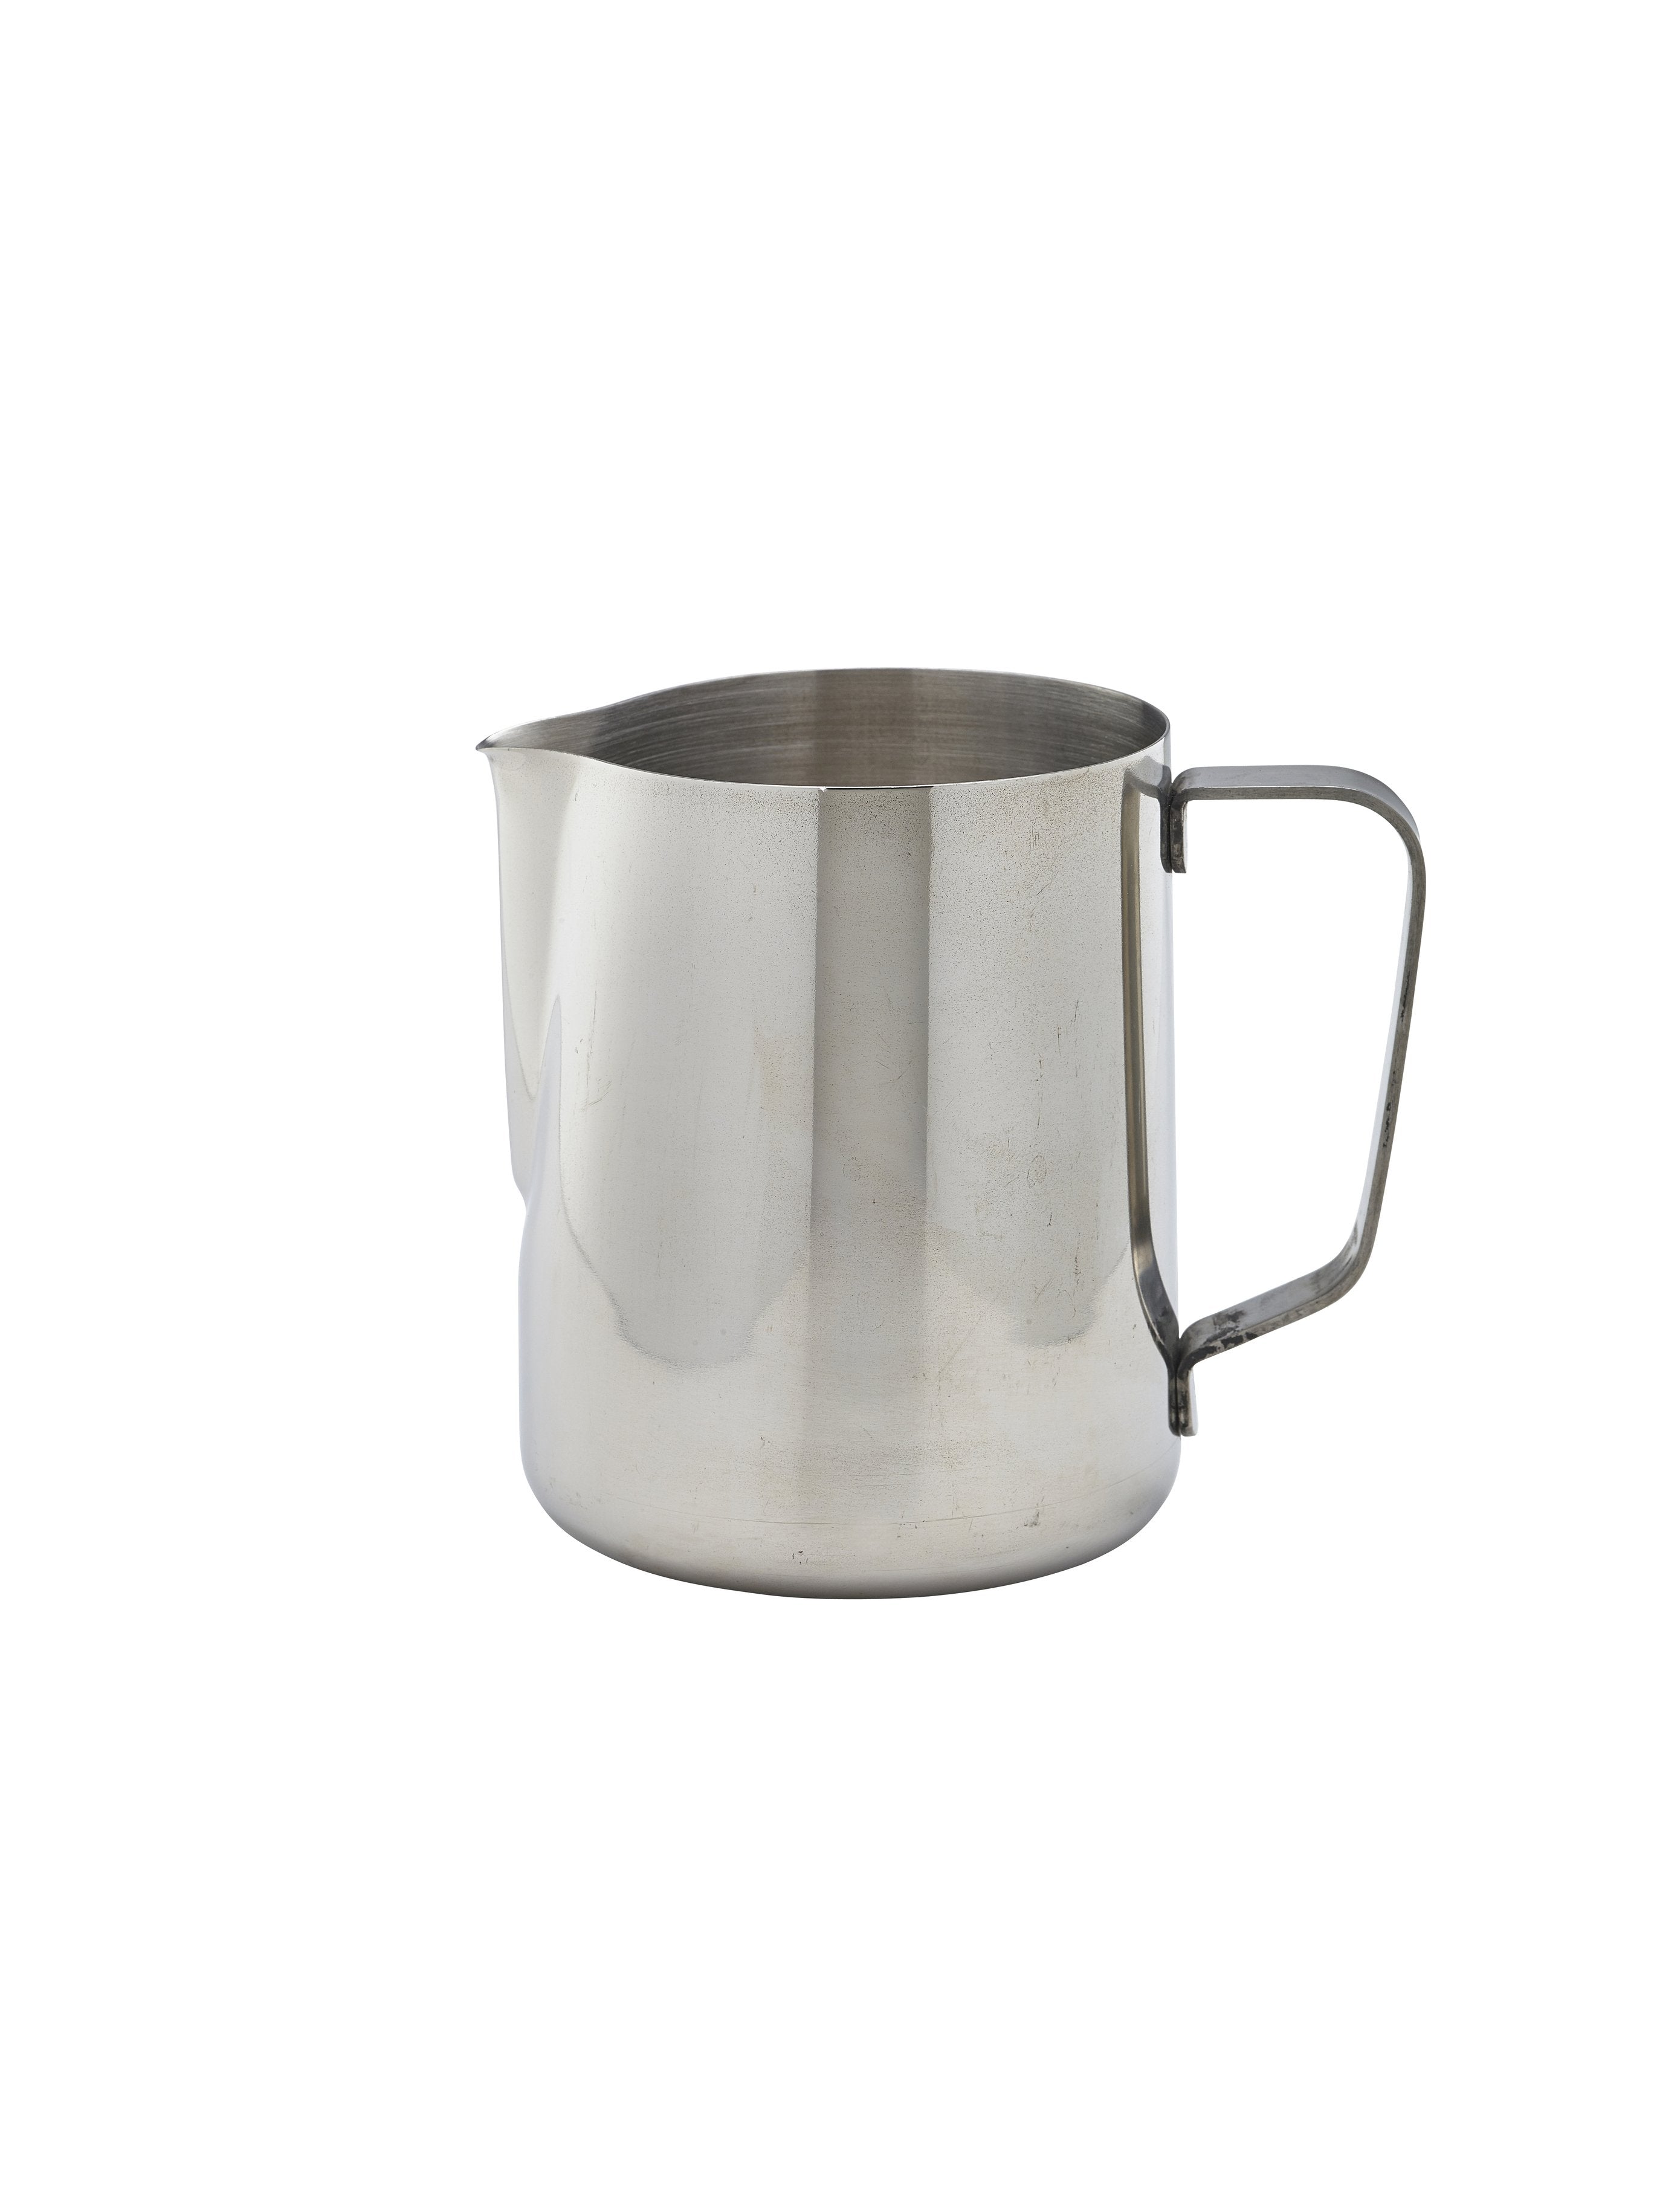 GenWare Stainless Steel Conical Jug 1.5L/50oz